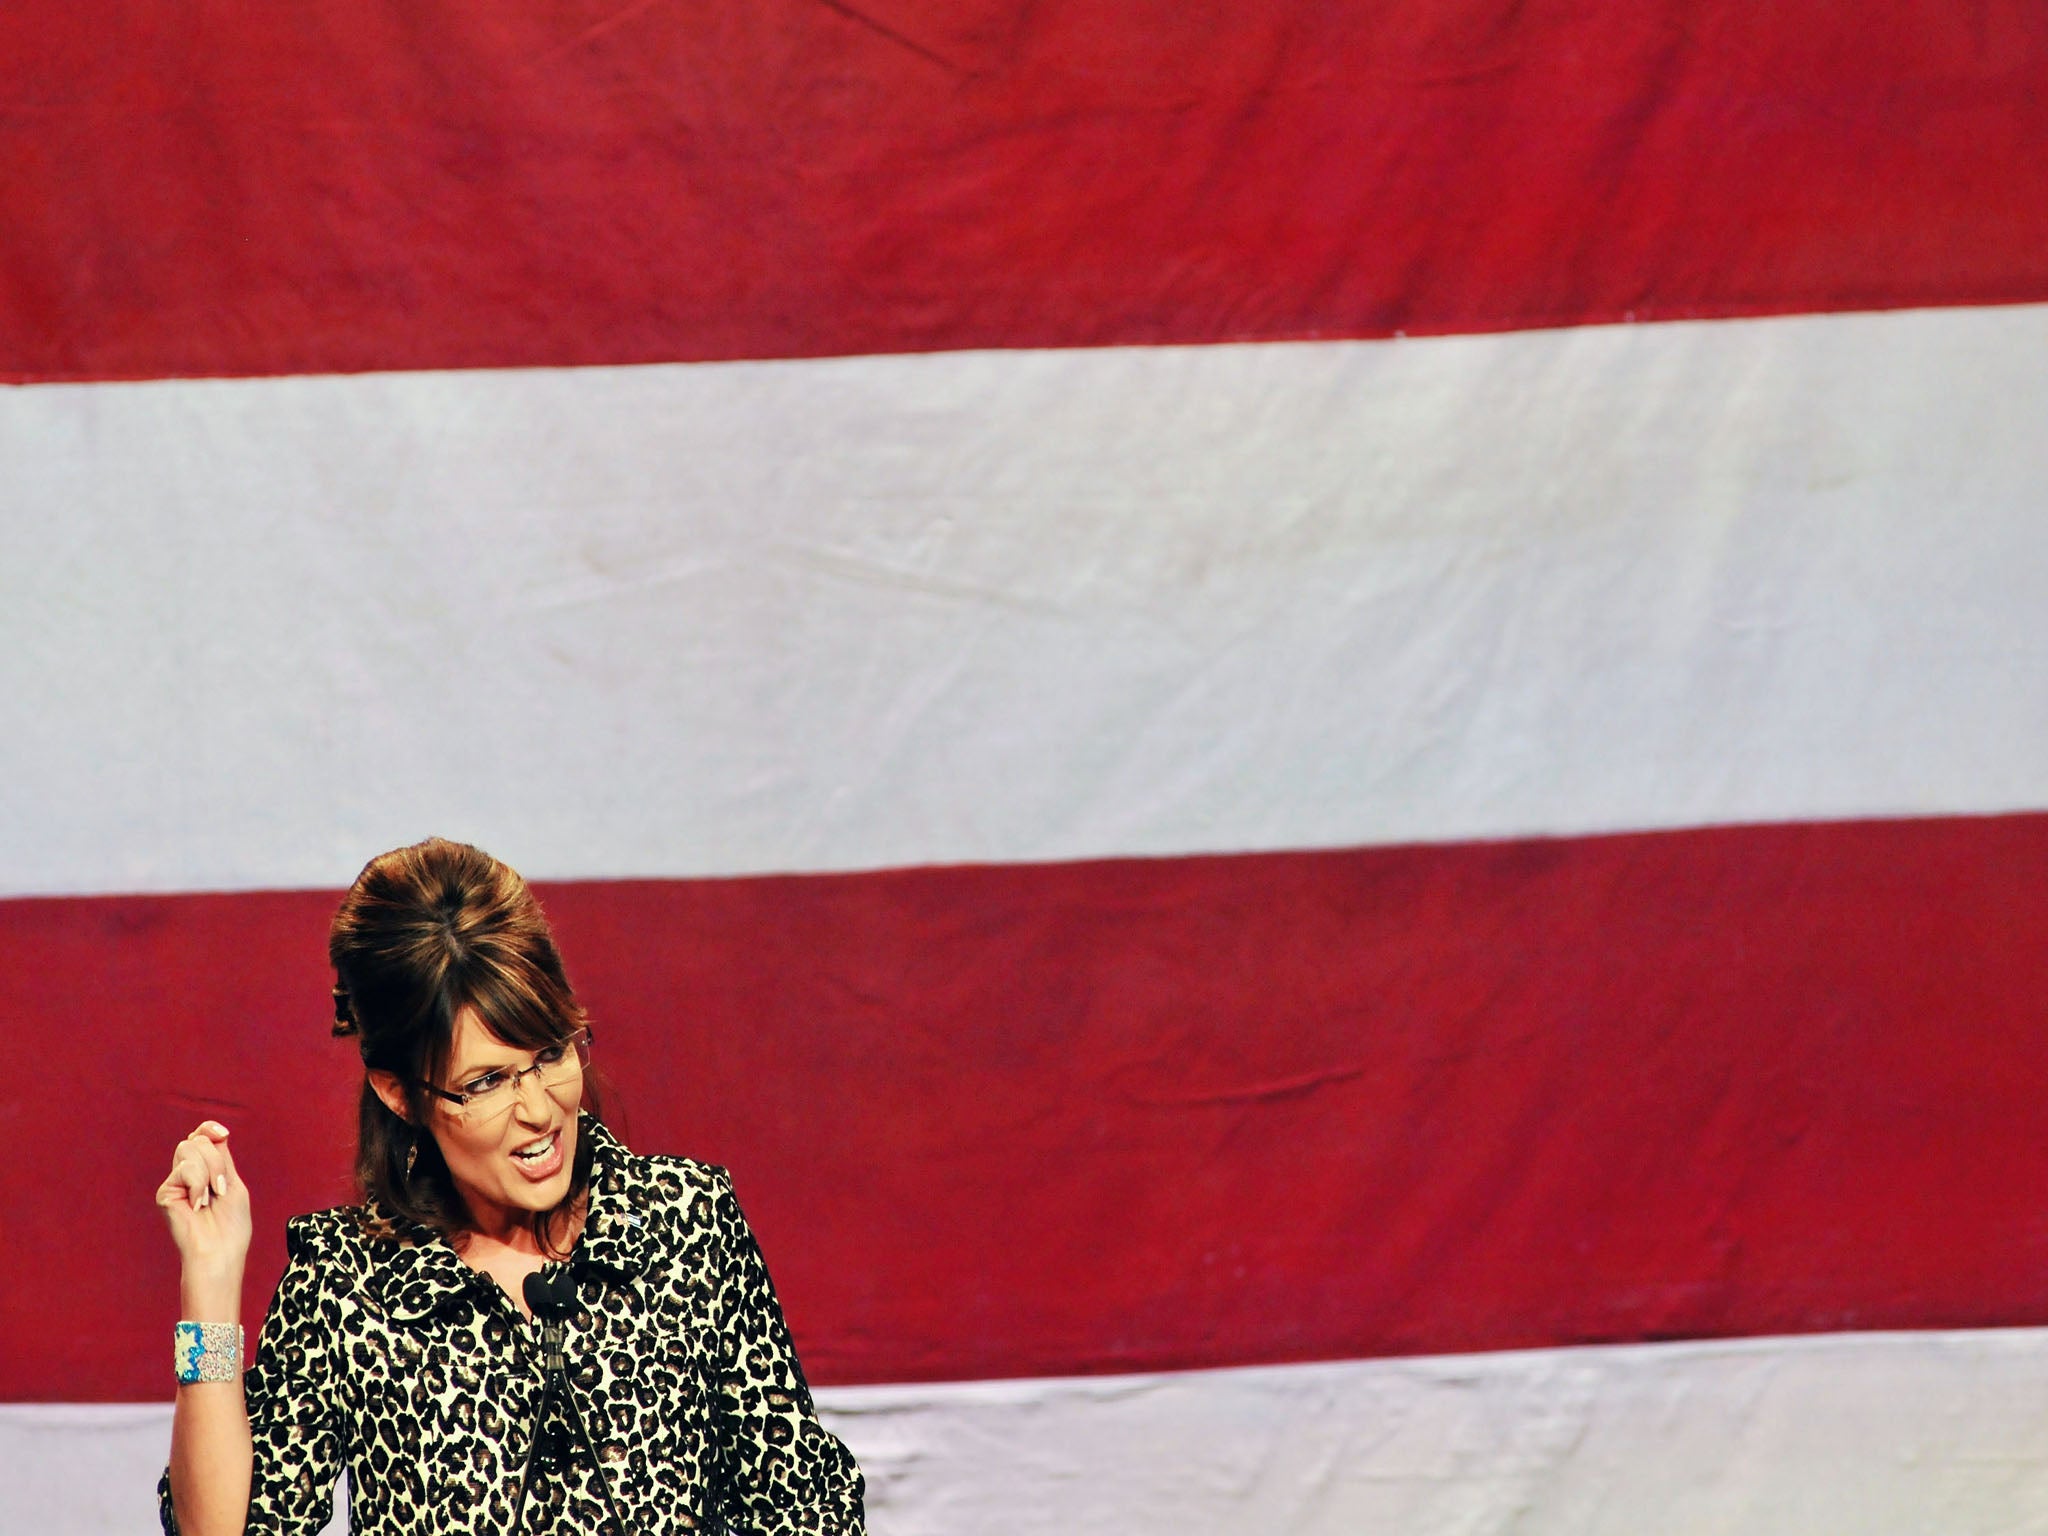 Sarah Palin said that she has not ruled out running for president in 2016